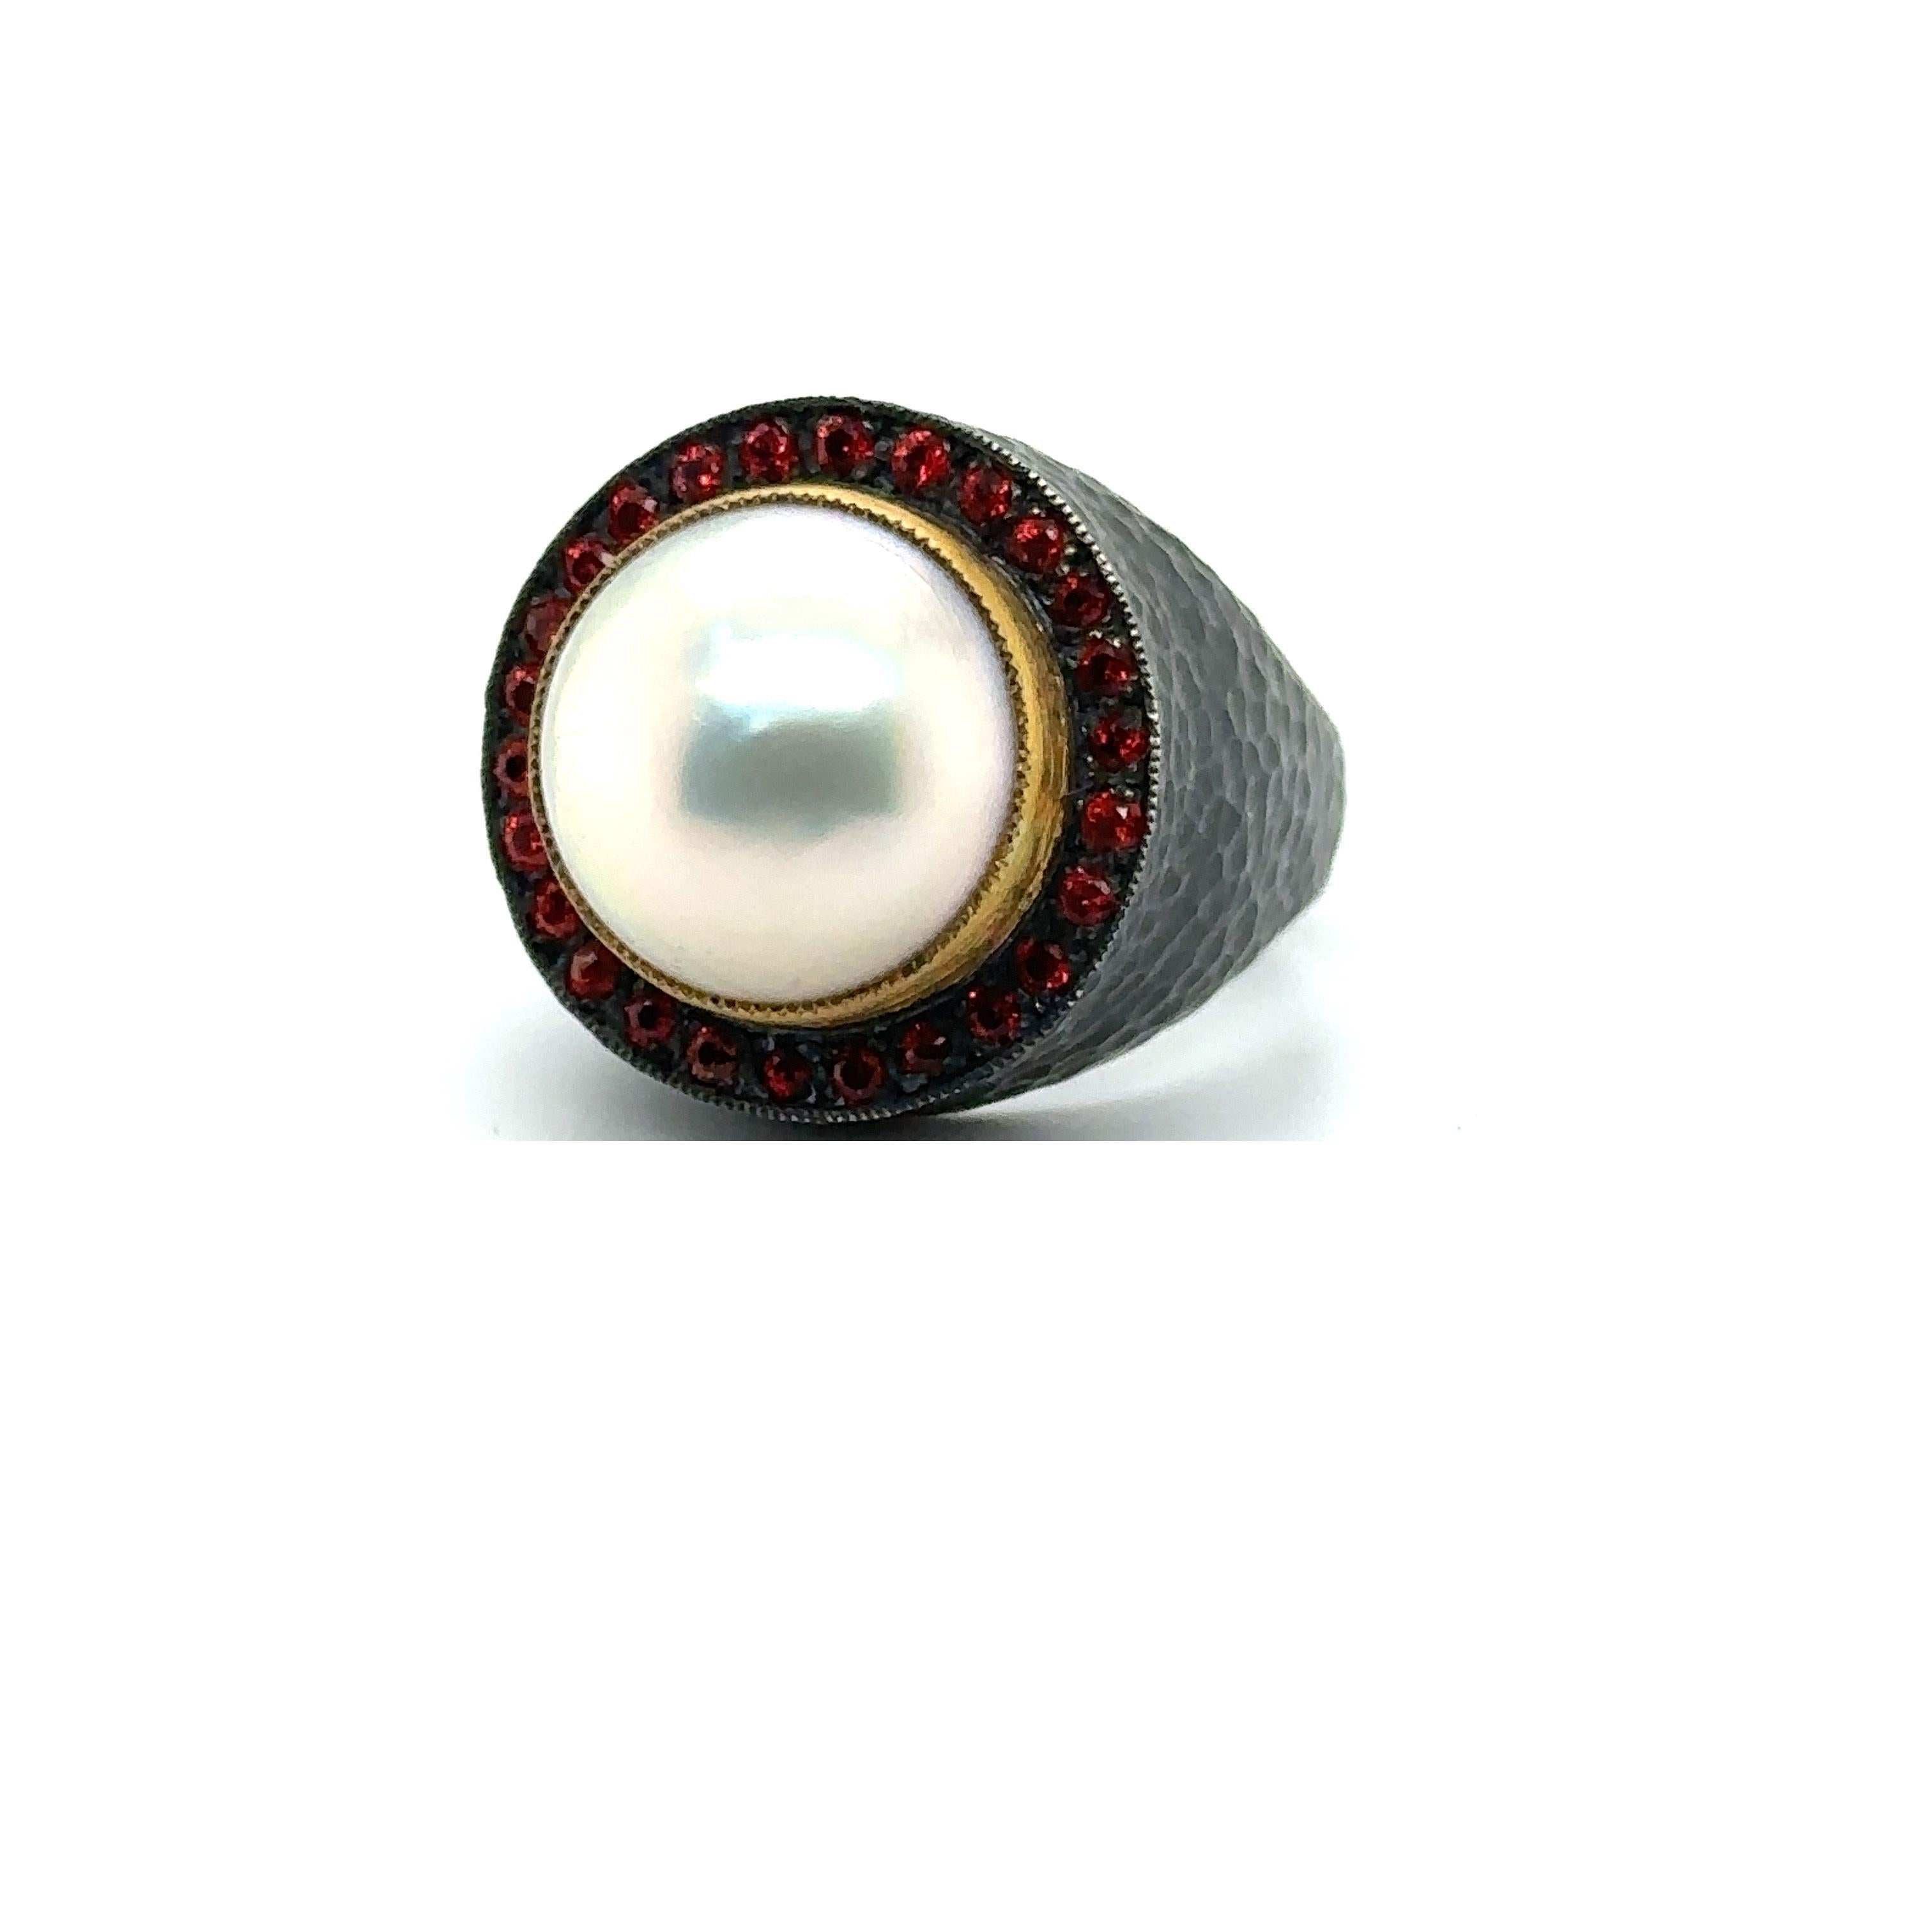 JAS-19-1971 - 24KT GOLD/SS 13MM MABE RING with 0.60CT RED SAPPHIRES For Sale 1